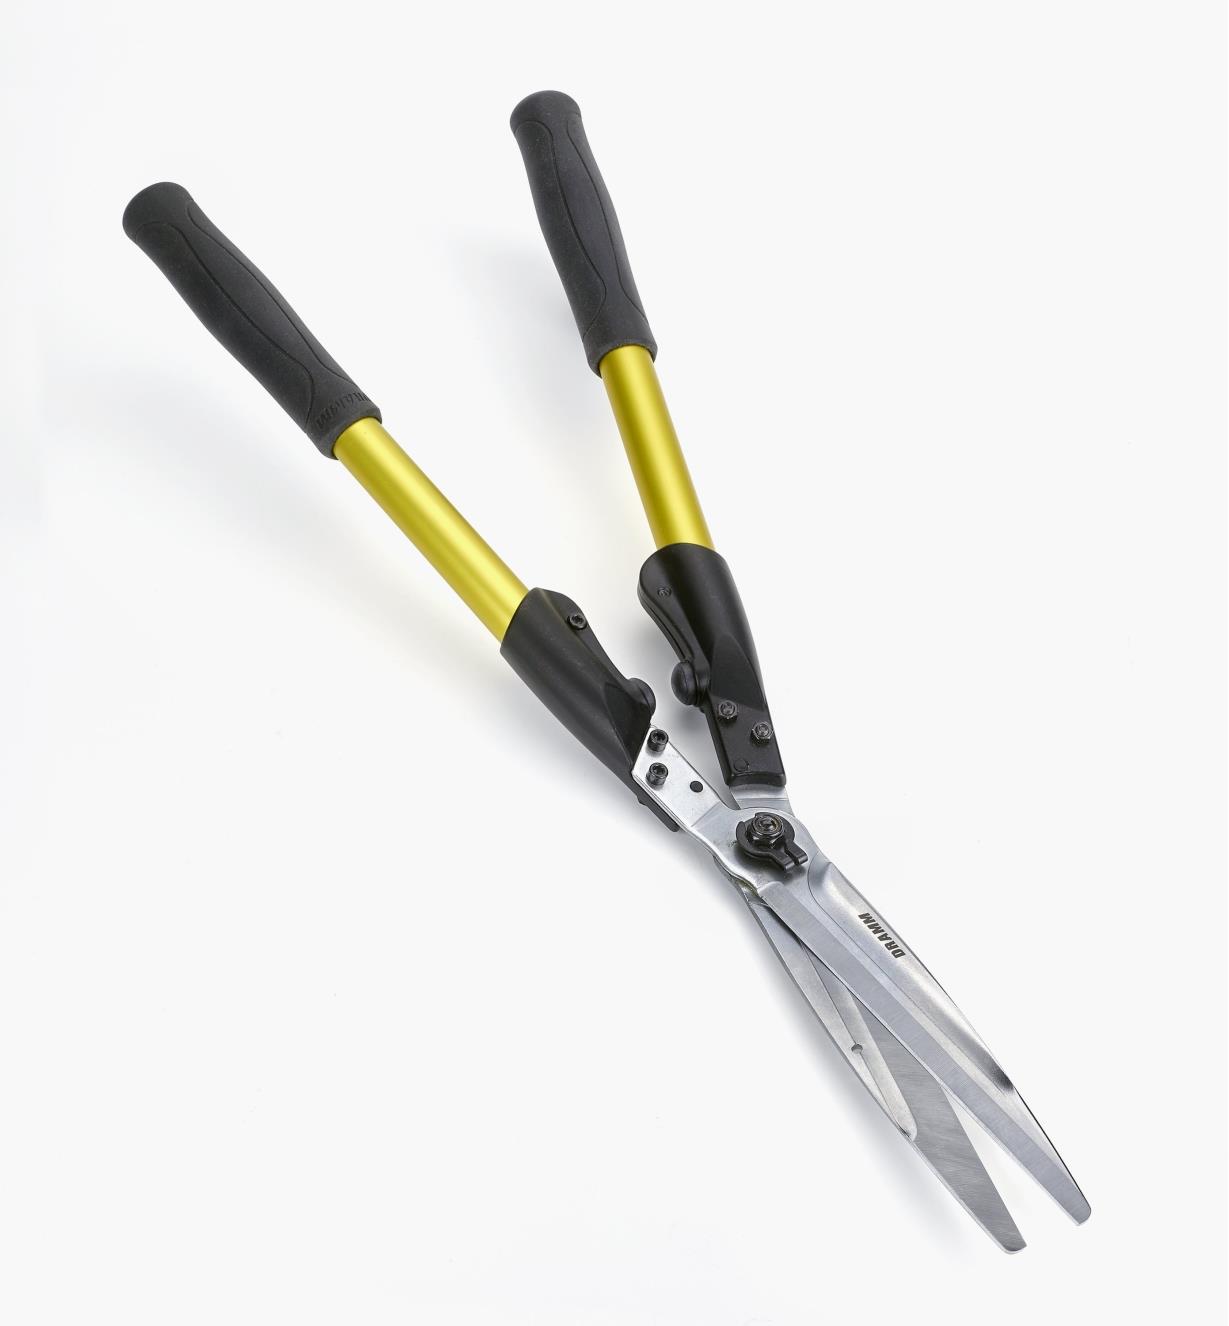 99W9152 - Hedge Shears with yellow handles